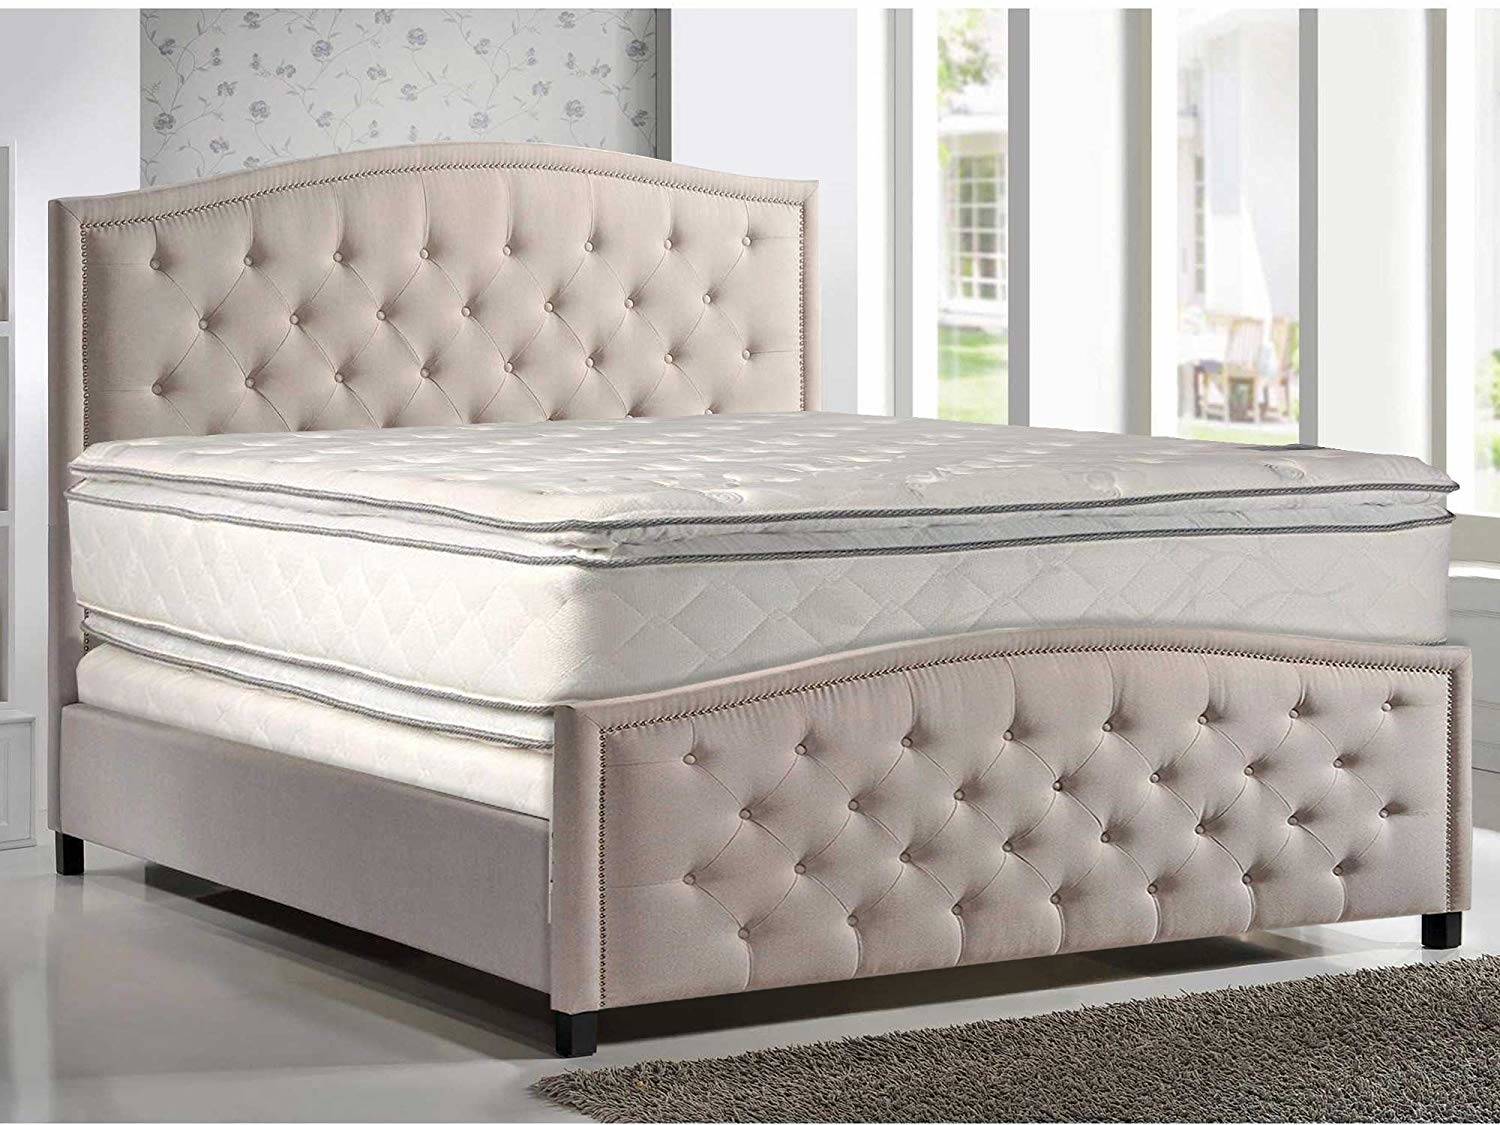 Best Double Sided Pillow Tops Mattress, Box Spring Mattress For King Size Bed